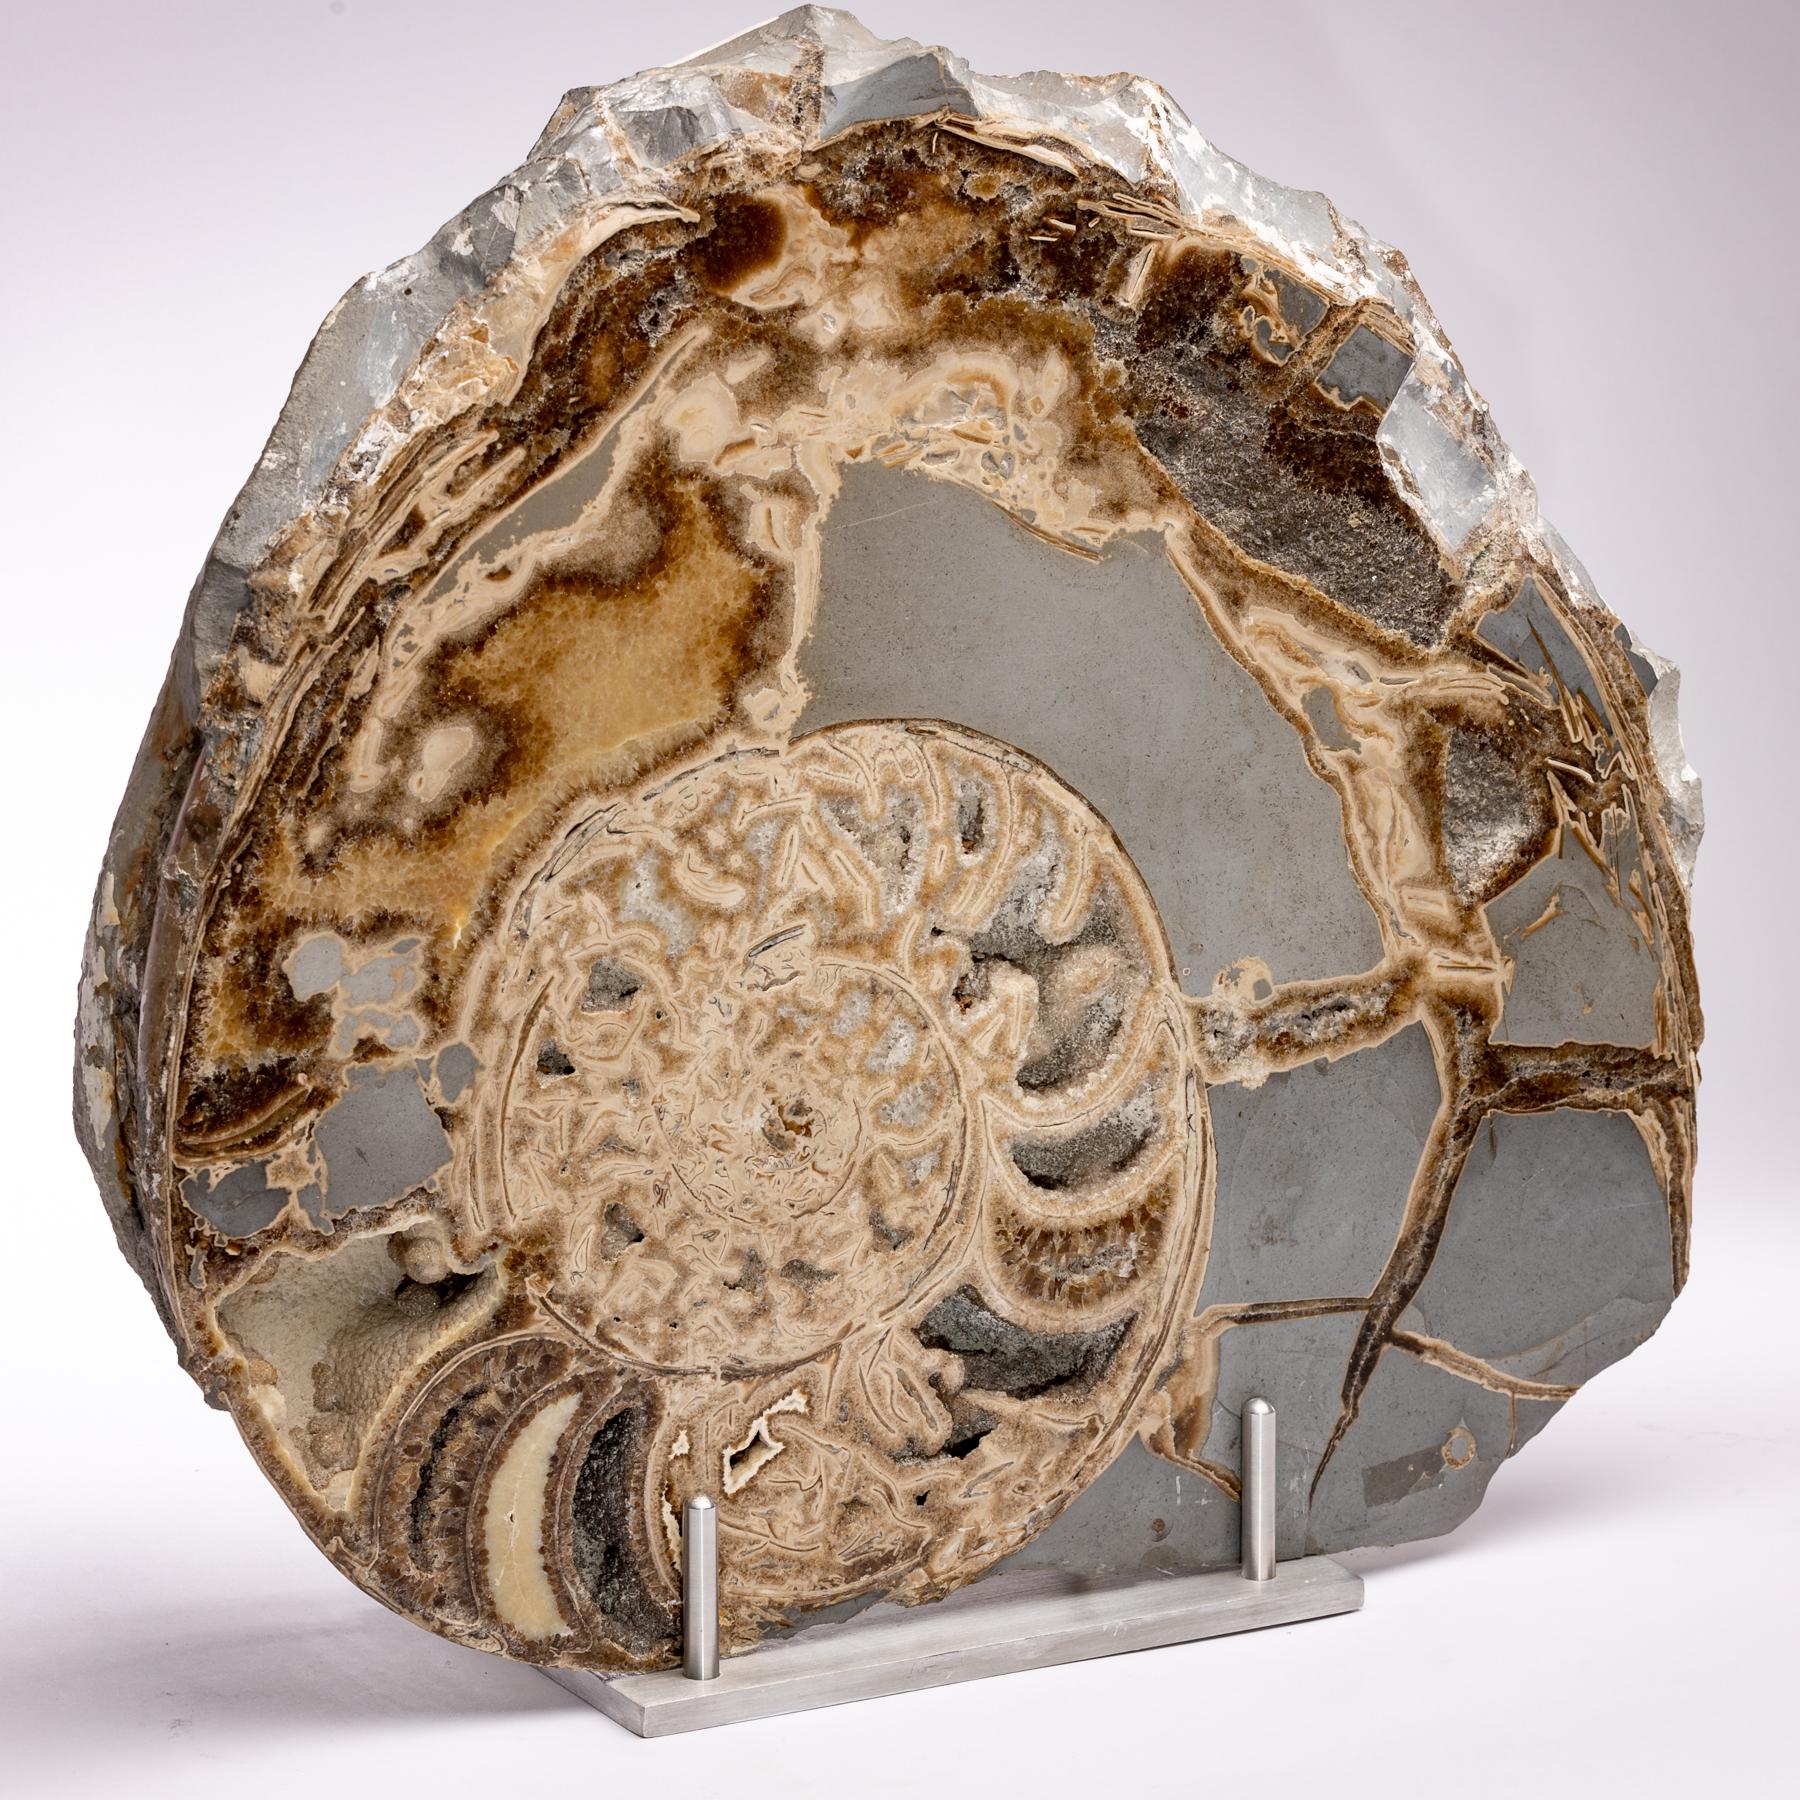 This Jurassic Period coast fossil ammonite from Dorset, UK is mounted on a custom made aluminum stand. It has inclusions of Septarian Calcite.
 